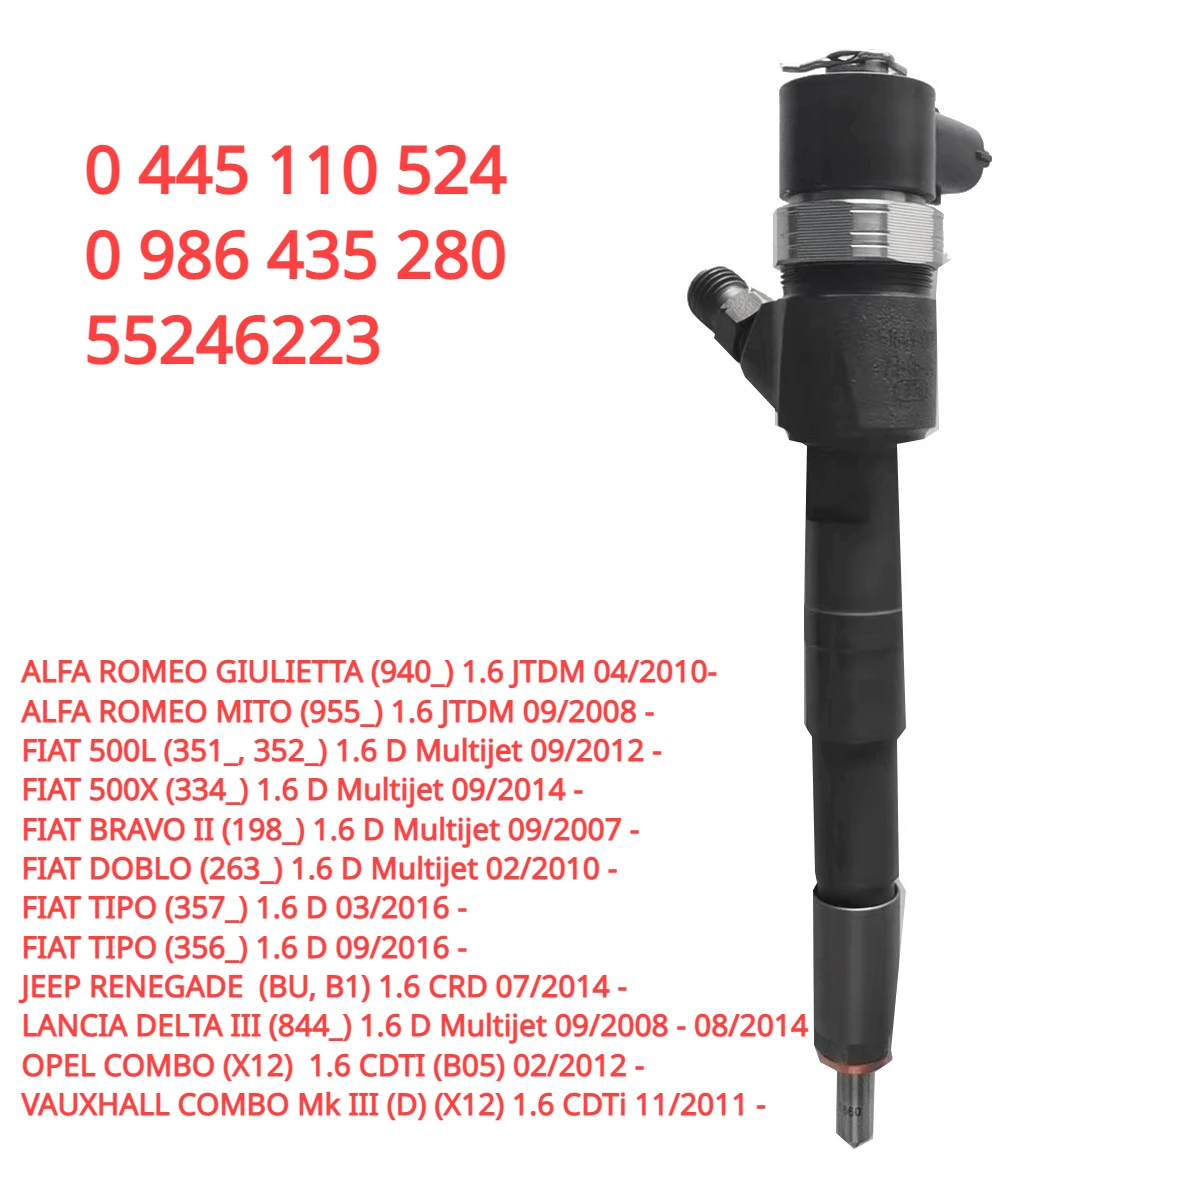 

0445110524 55246223 New Diesel Fuel Injector for FIAT 500L ALFA ROMEO LANCIA DOBLO TIPO VAUXHALL OPEL COMBO 1.6D